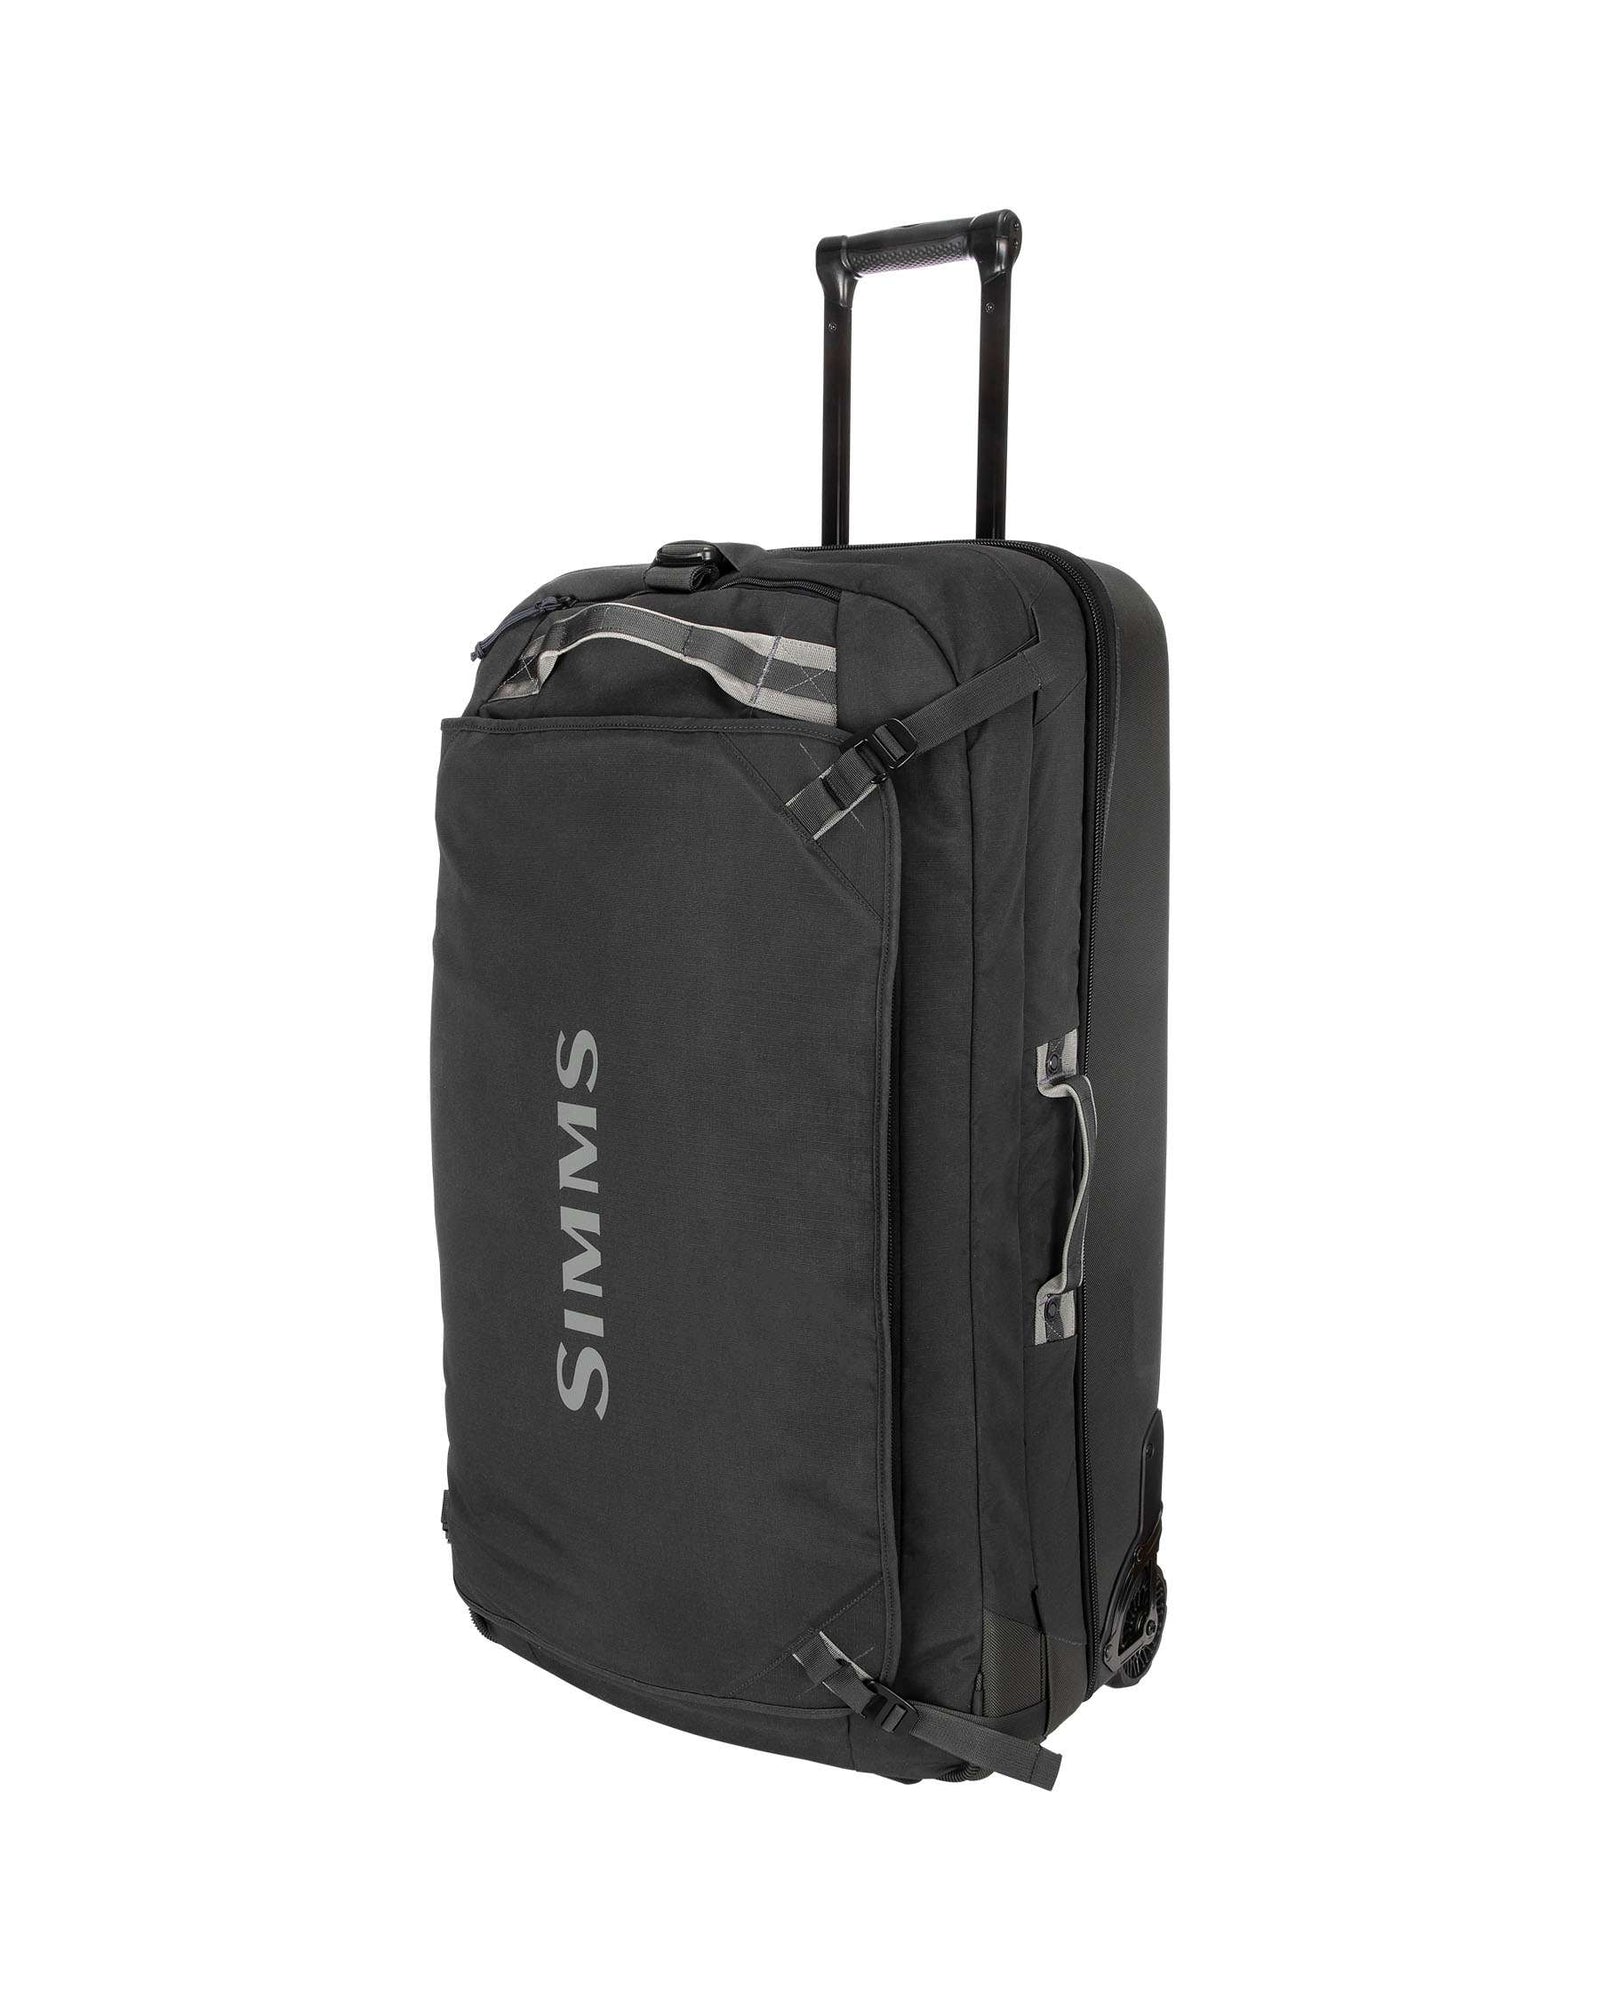 Simms GTS Double Rod Reel Case  Buy Simms Rod and Reel Cases